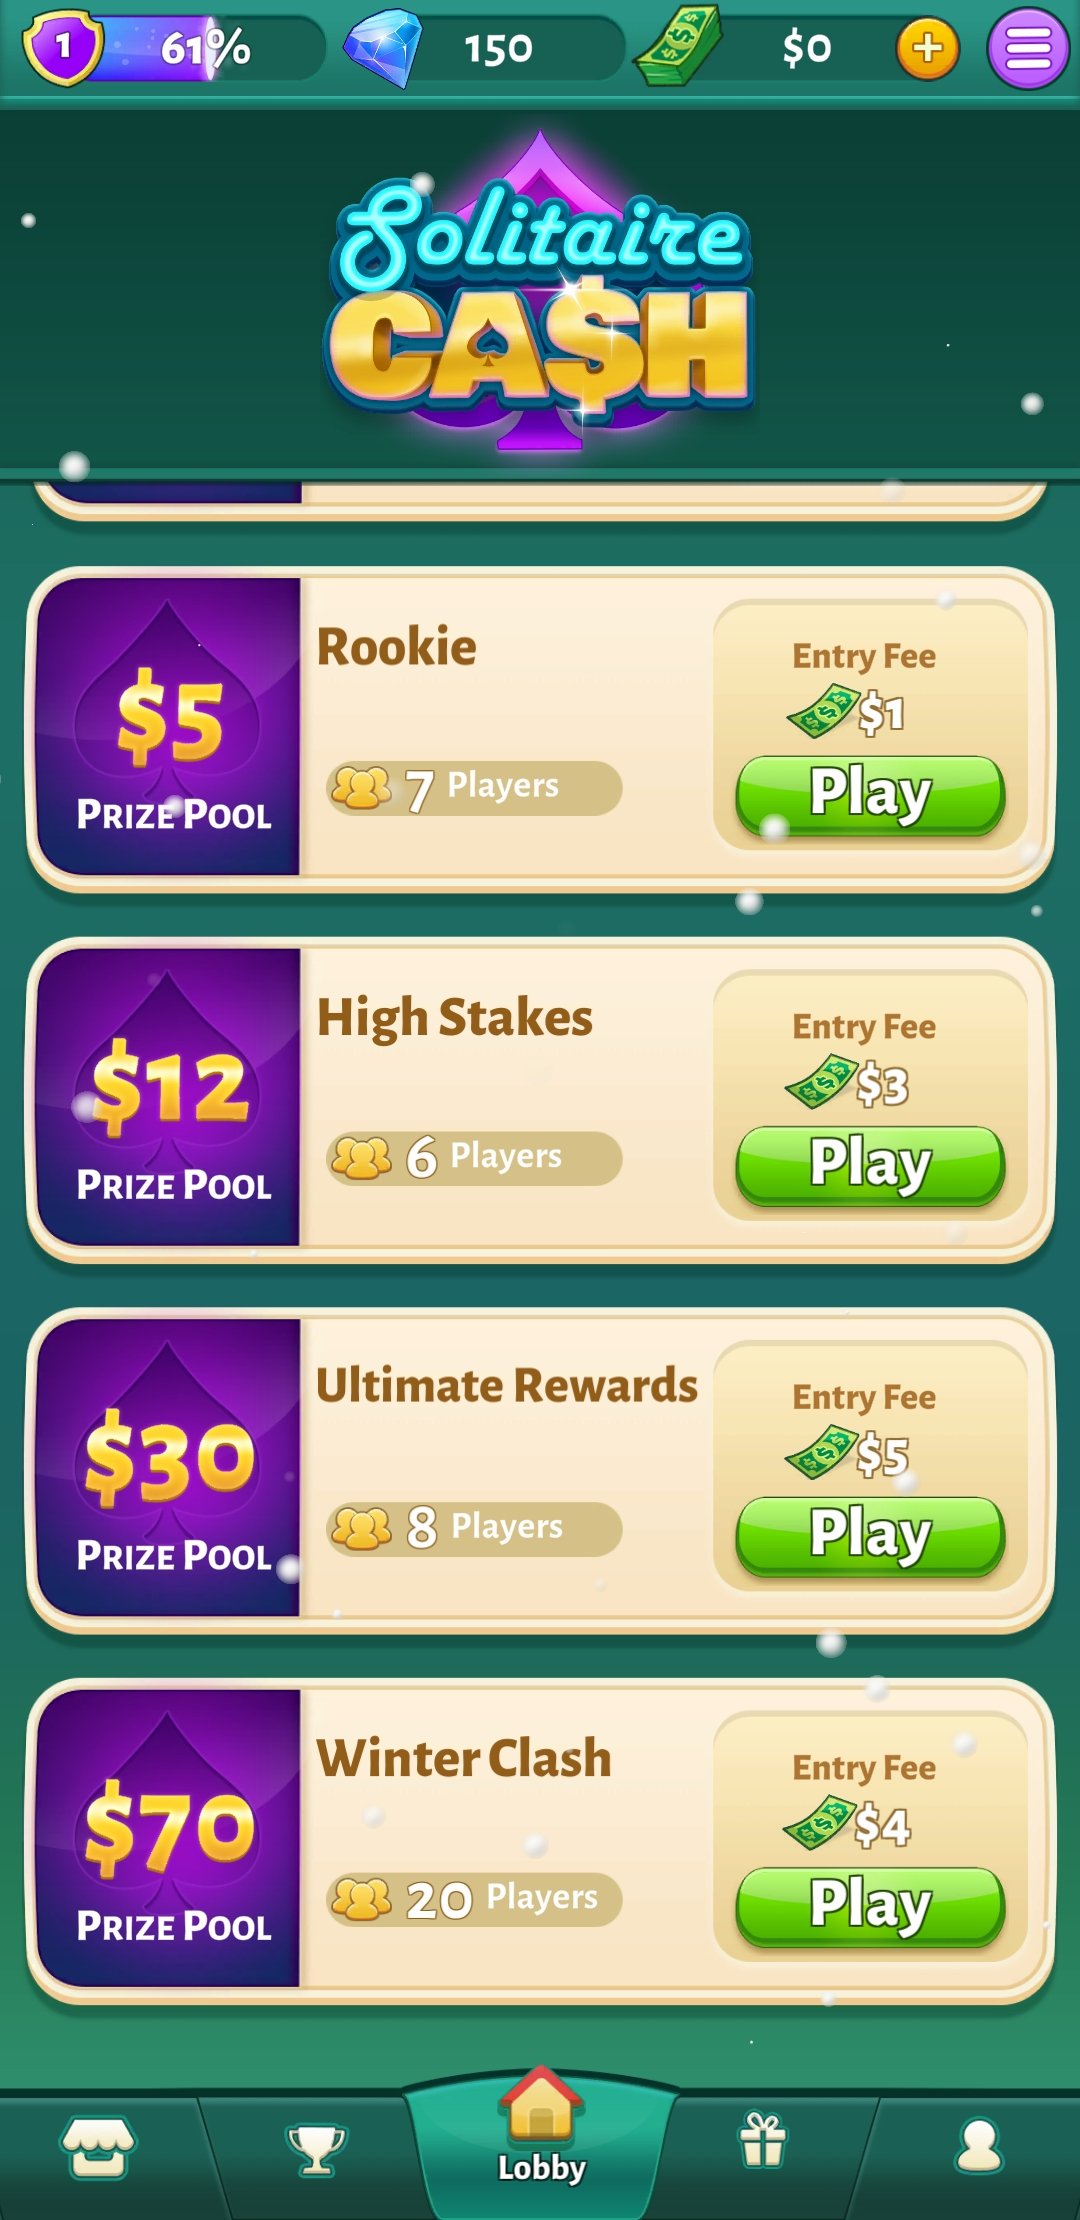 Has anyone ever received money from playing a game that is